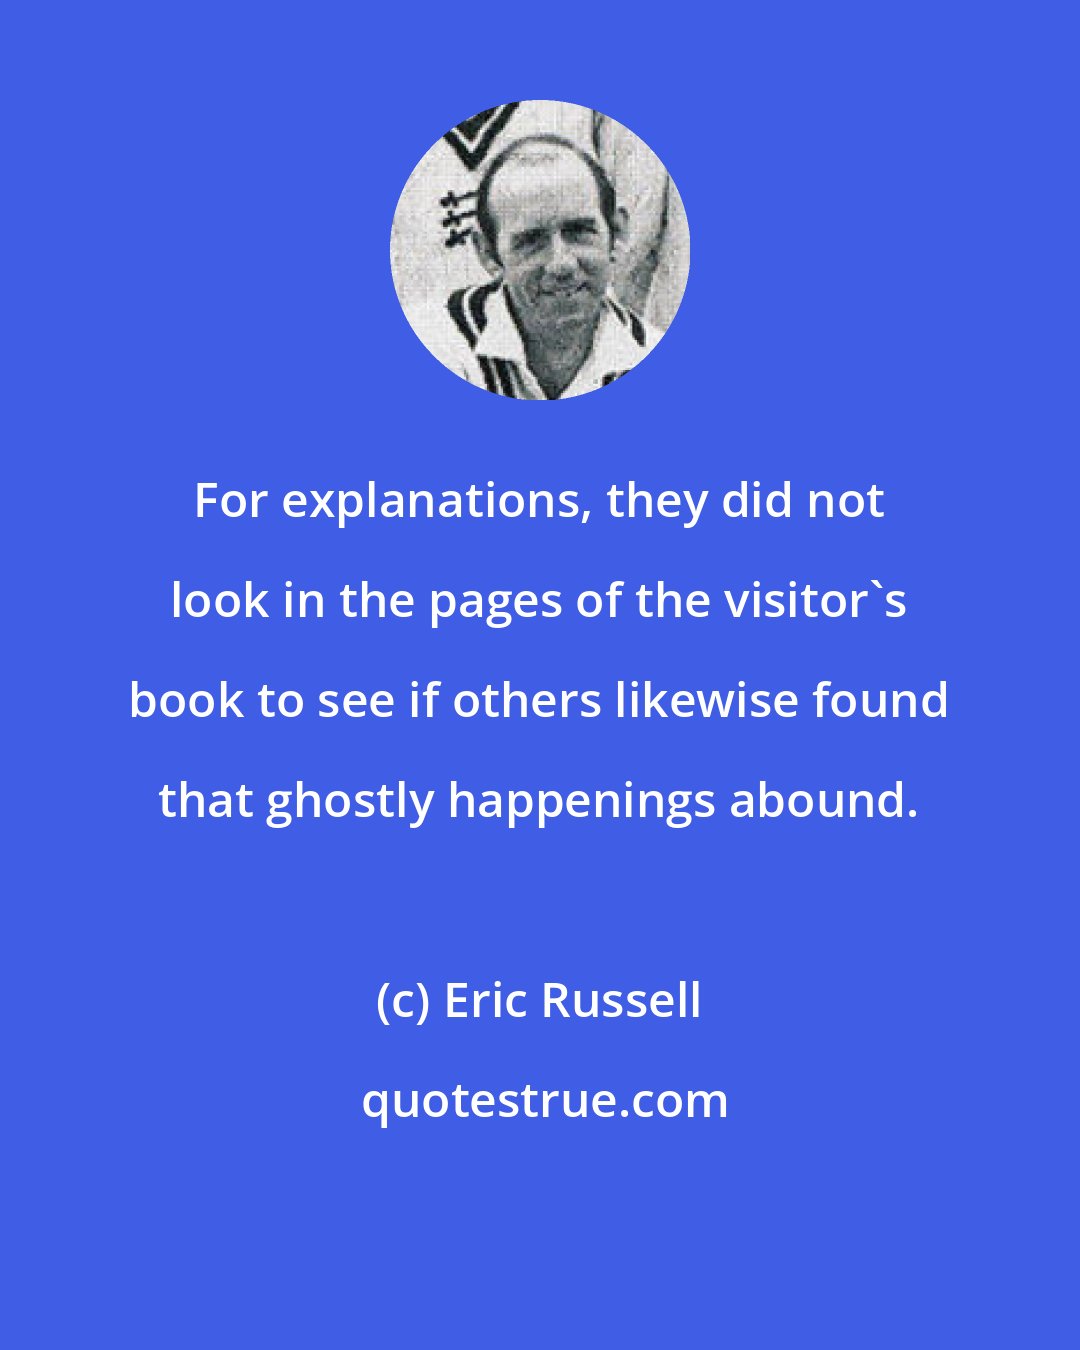 Eric Russell: For explanations, they did not look in the pages of the visitor's book to see if others likewise found that ghostly happenings abound.